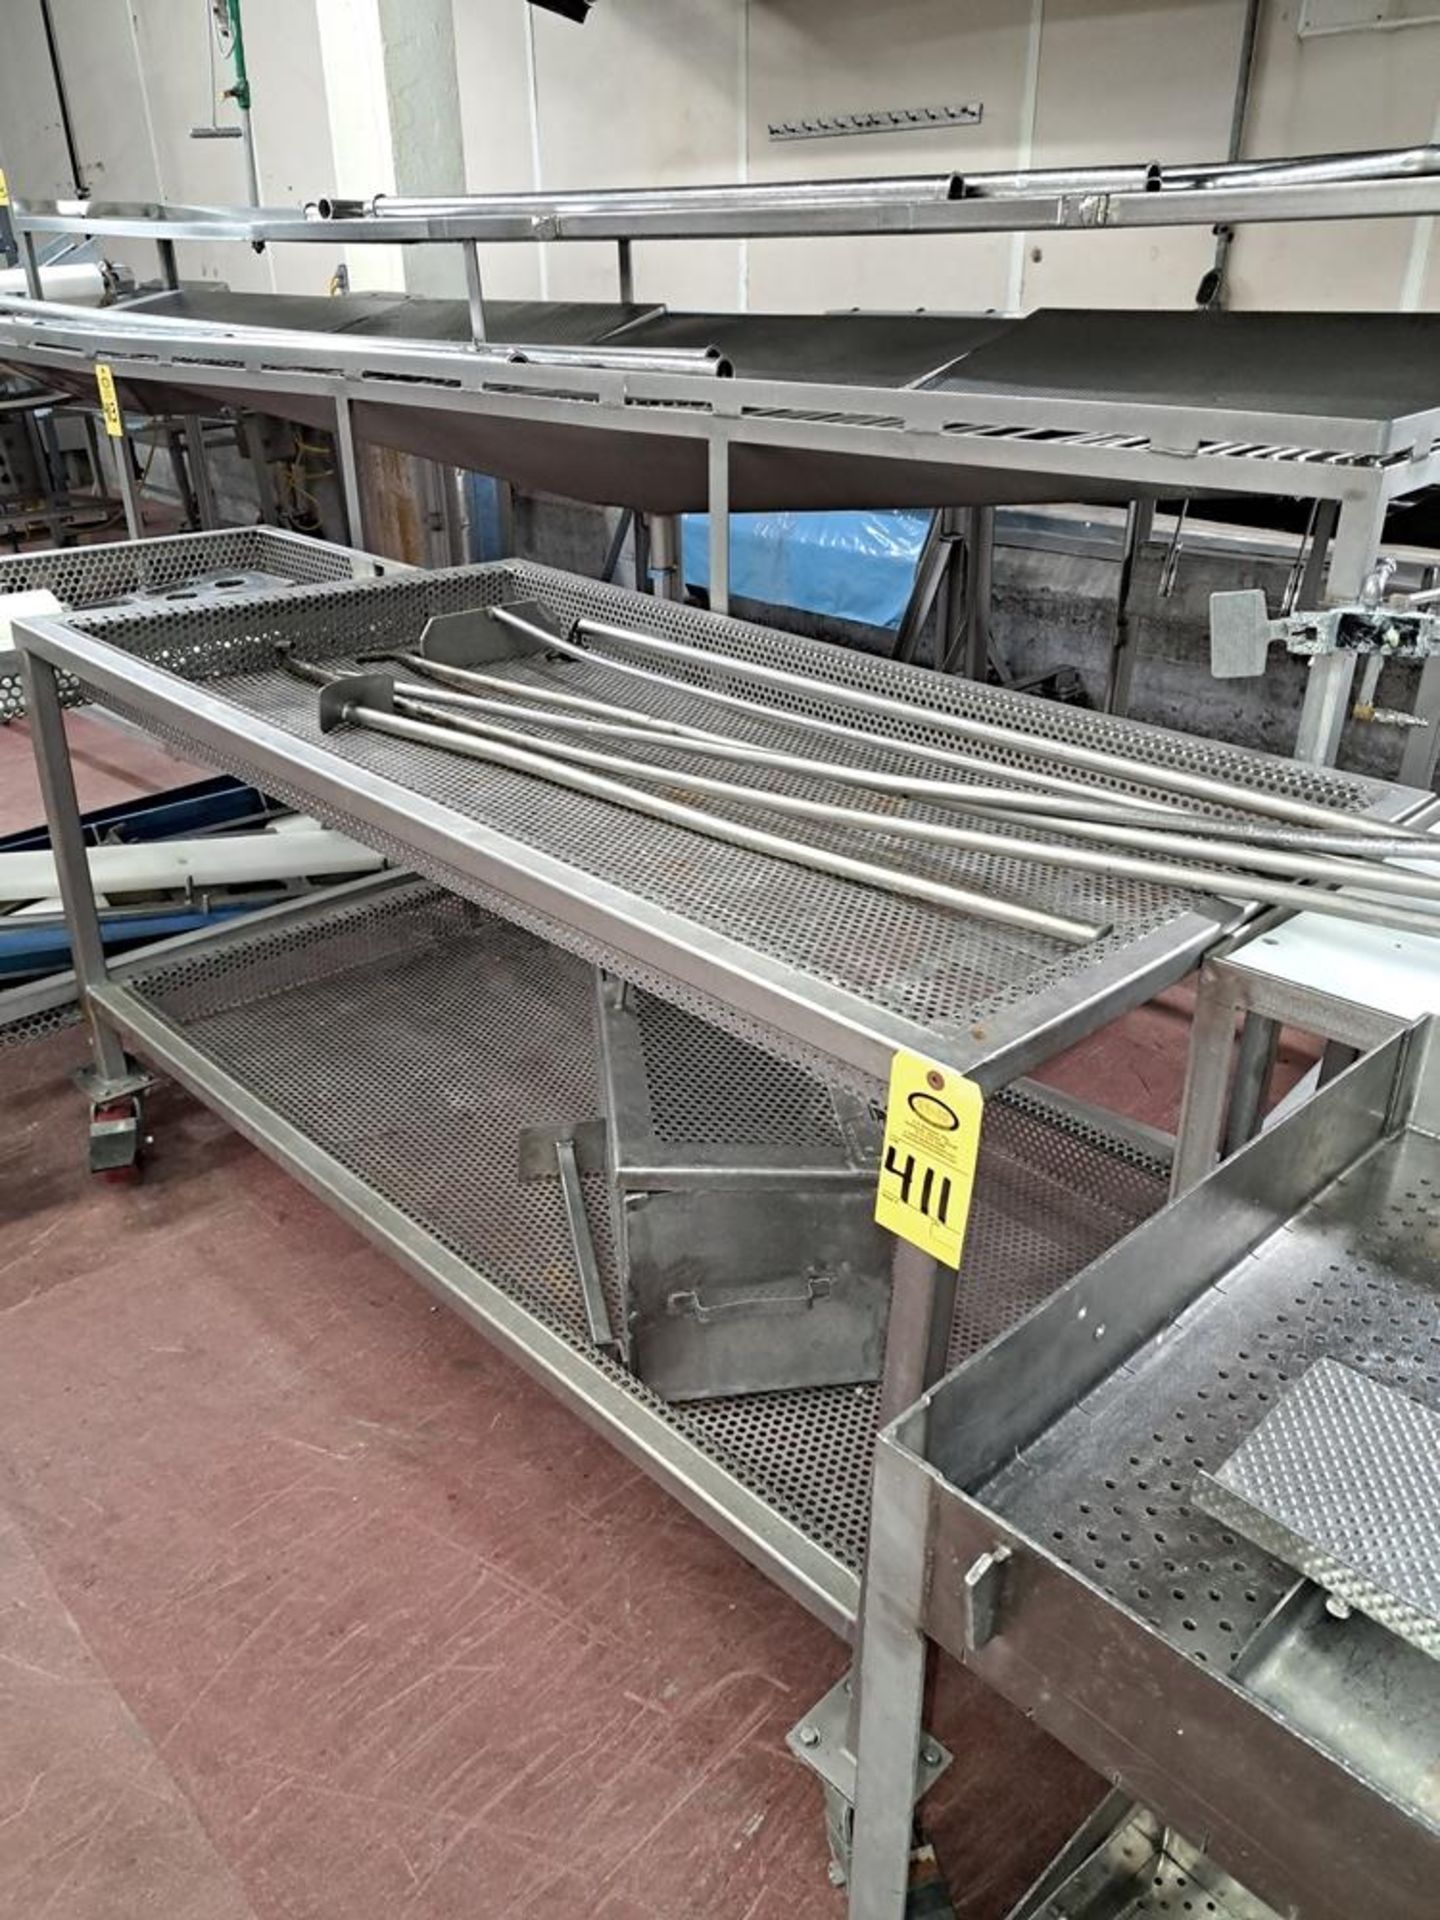 Stainless Steel Parts Cart, 32" W X 5' L: Required Loading Fee $50.00, Rigger-Norm Pavlish, Nebraska